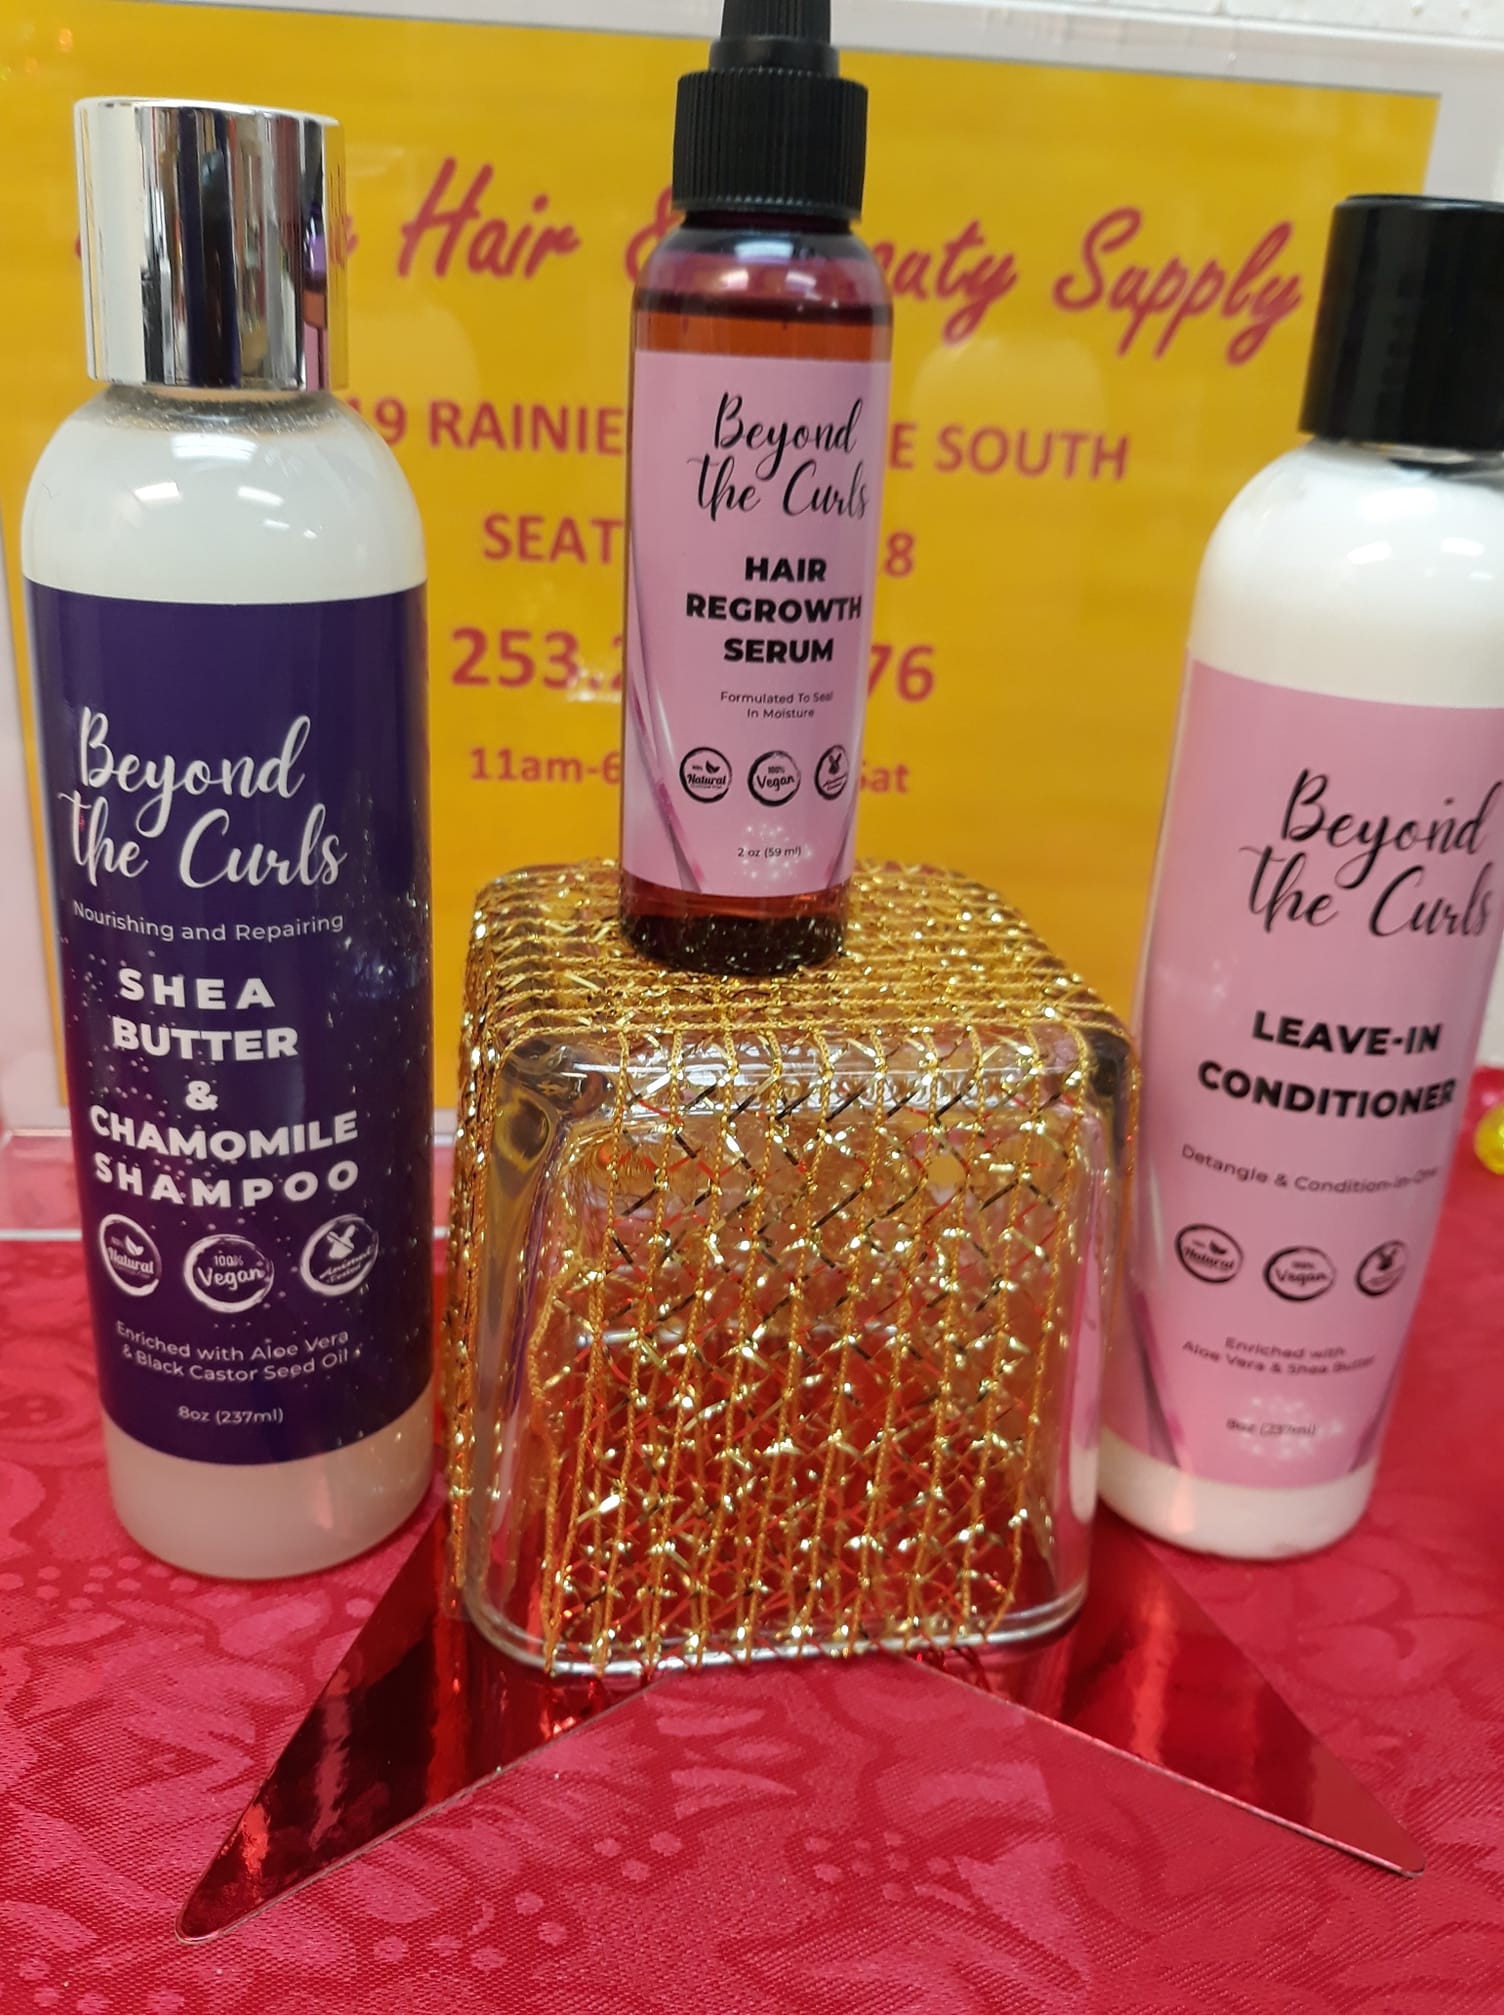 Legacy Hair & Beauty Beyond the curls products